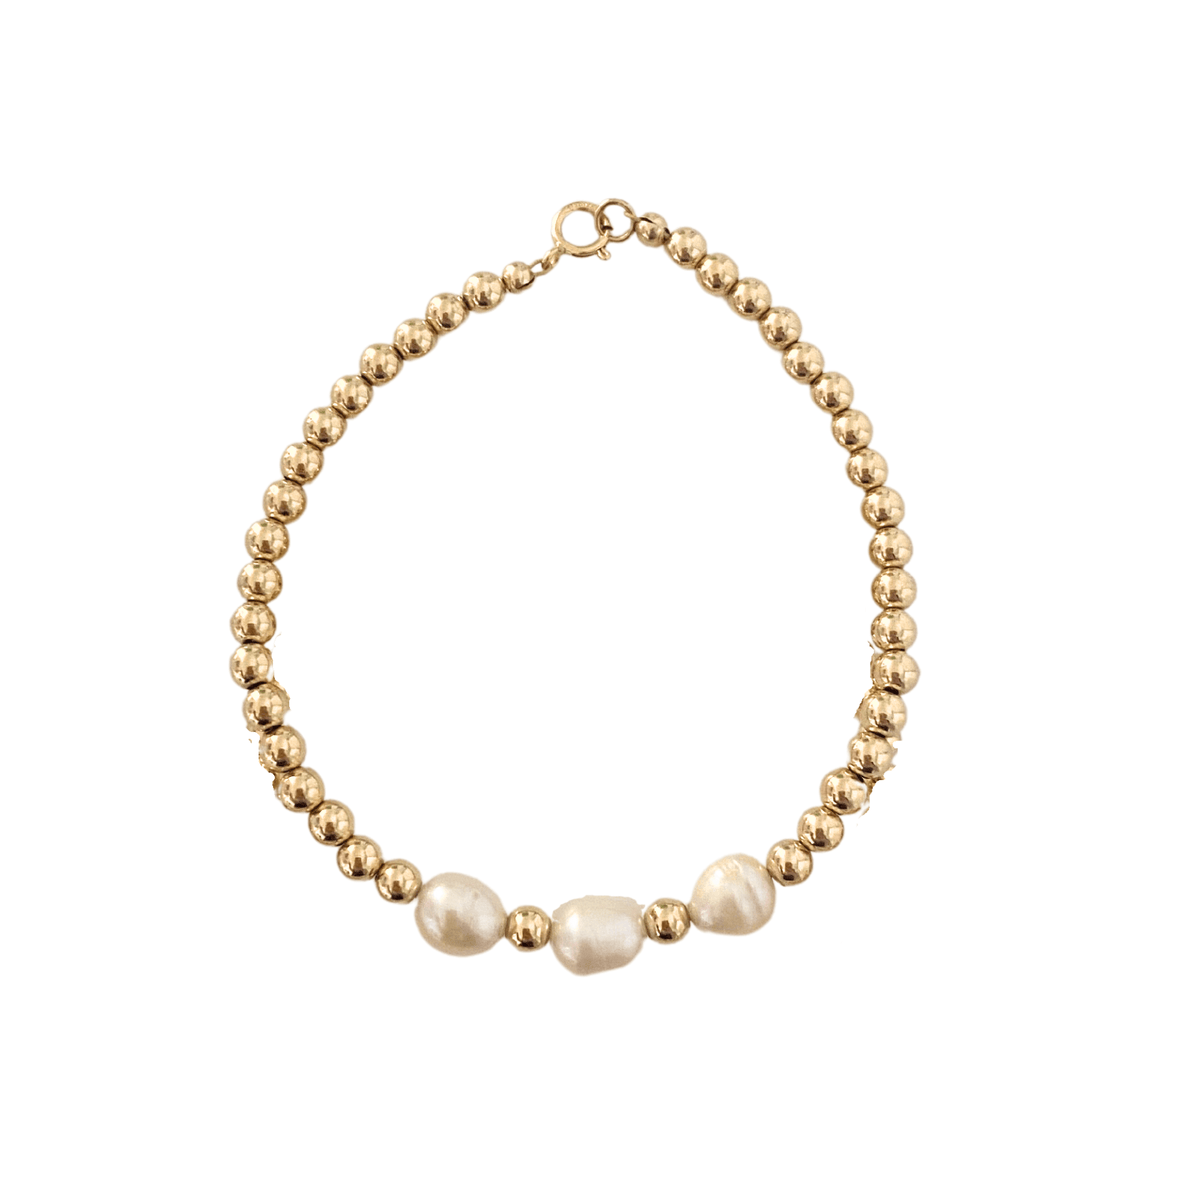 14k gold filled genuine pearl and bead bracelet